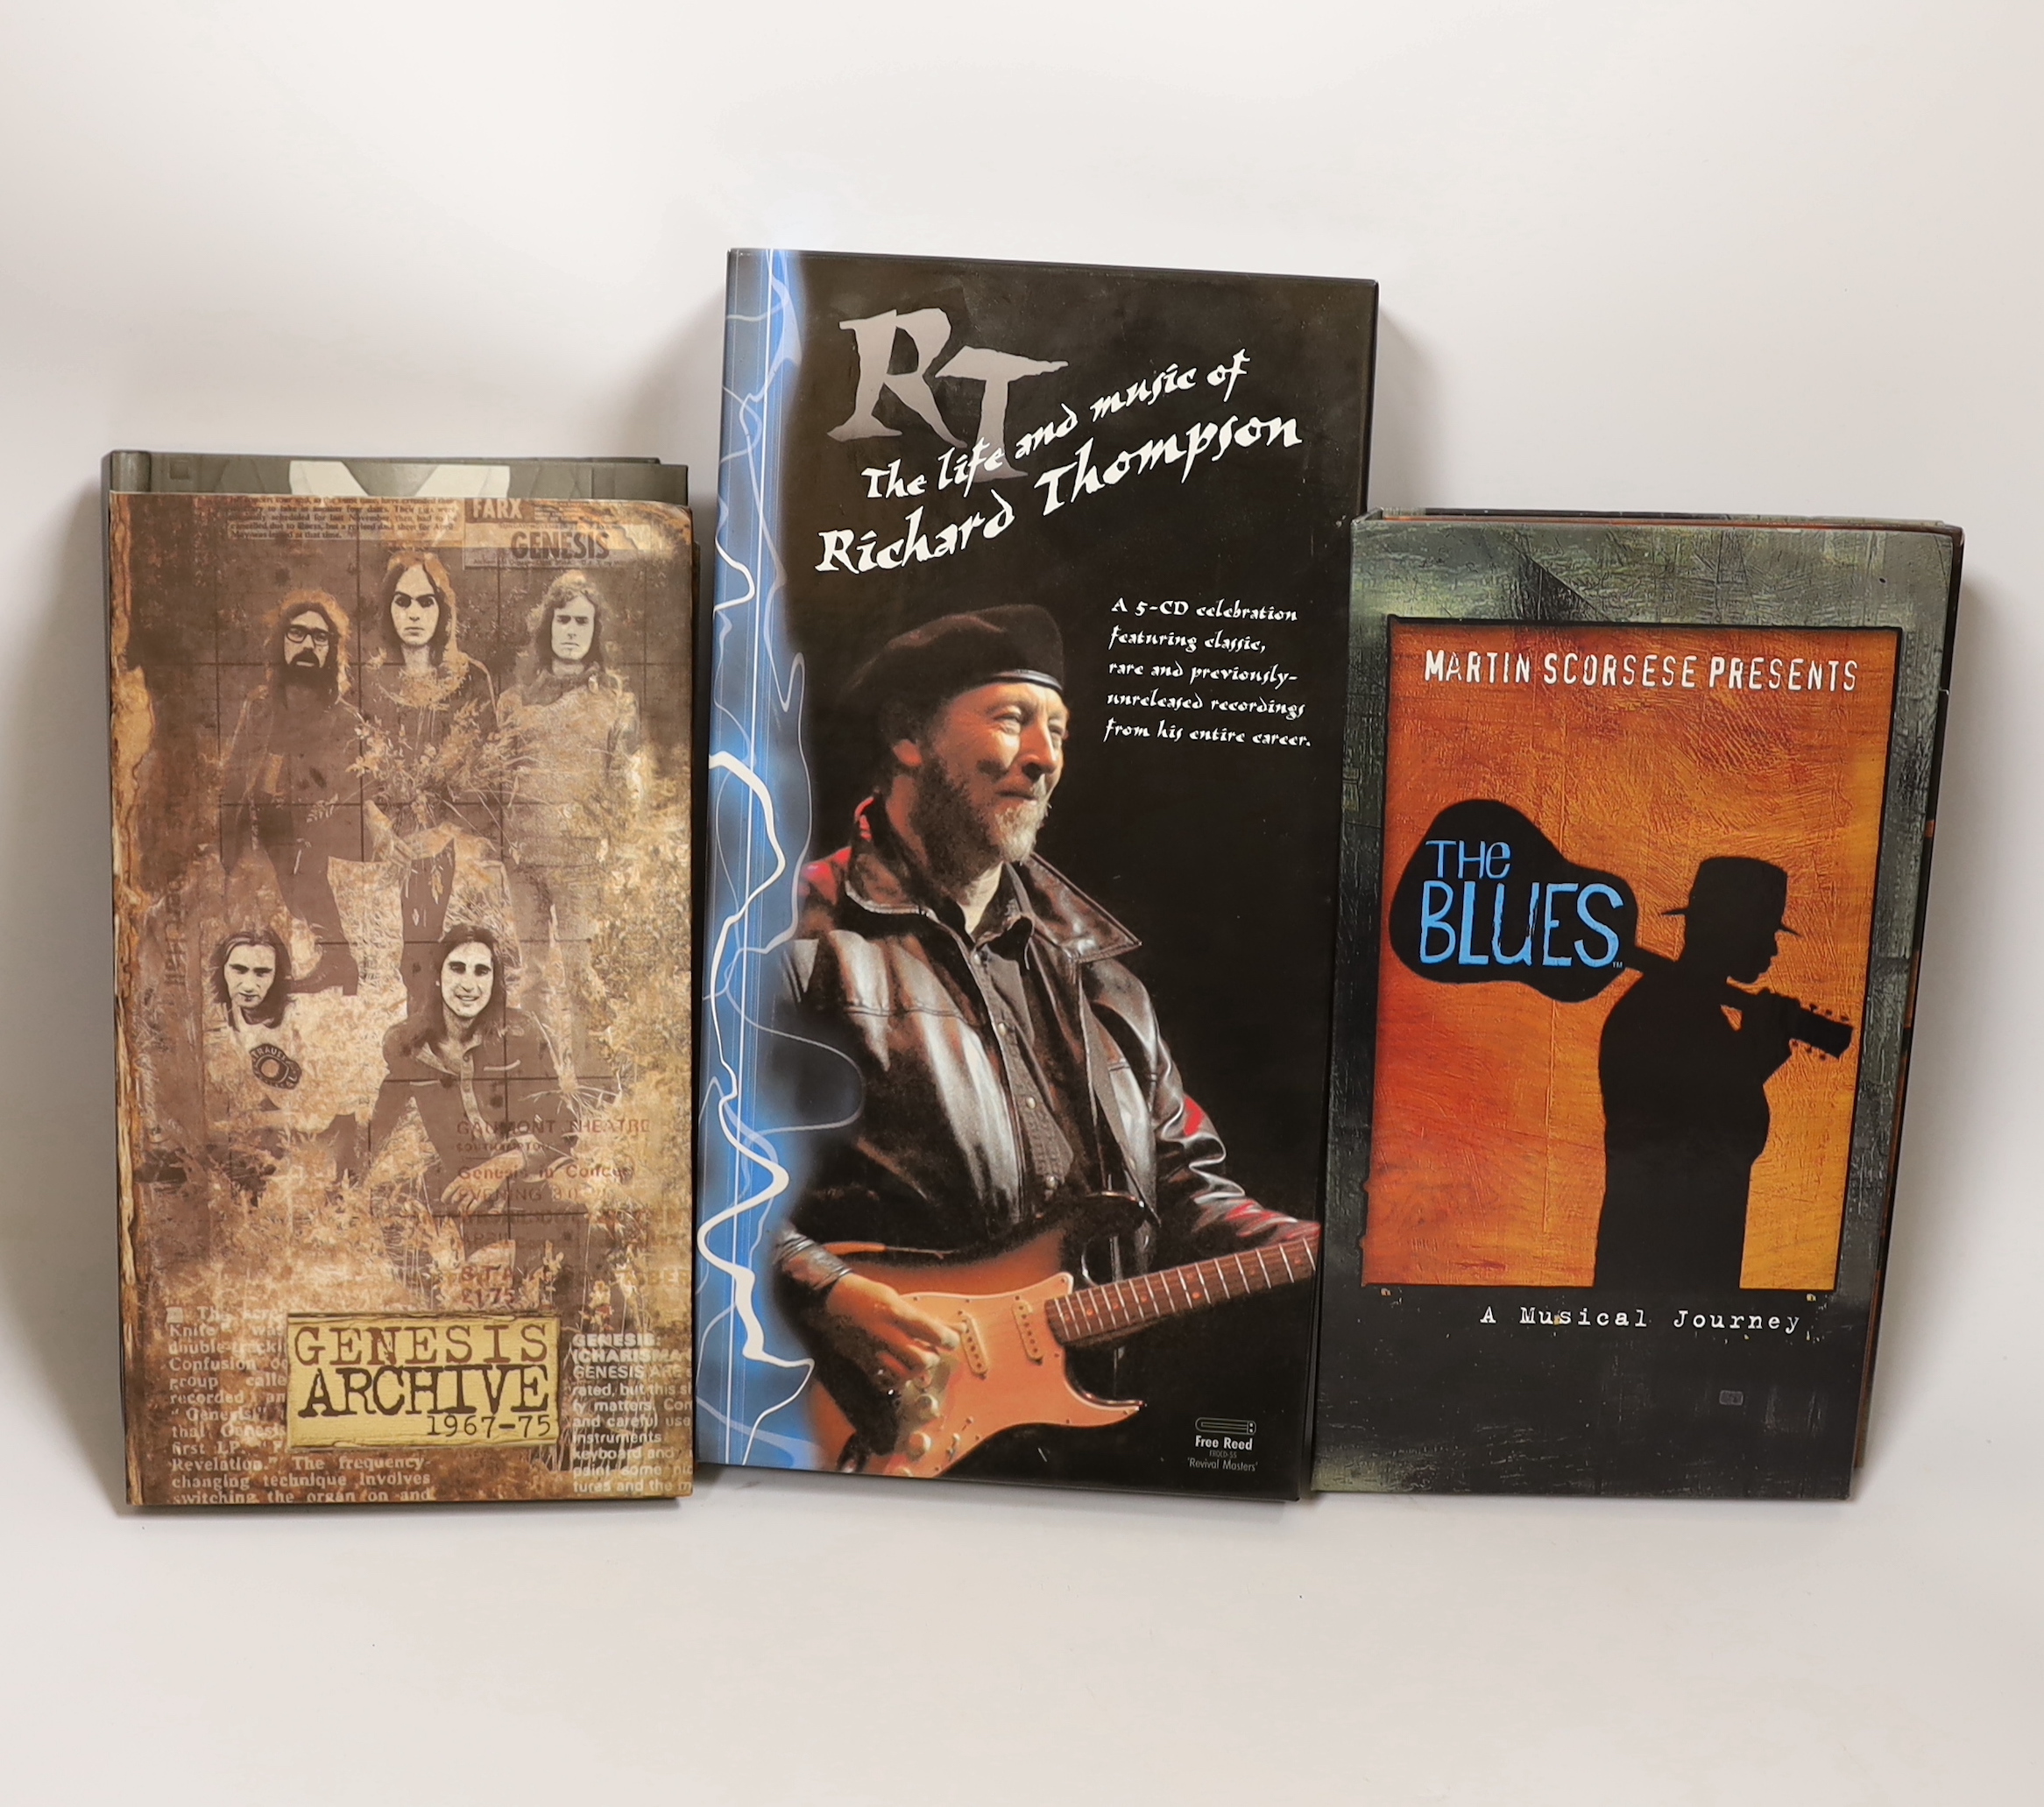 Four CD box sets; The Life and music of Richard Thompson, XTC Coat of Many Colours, Genesis Archive 1967-75, Martin Scorsese Presents the Blues (a Musical Journey)